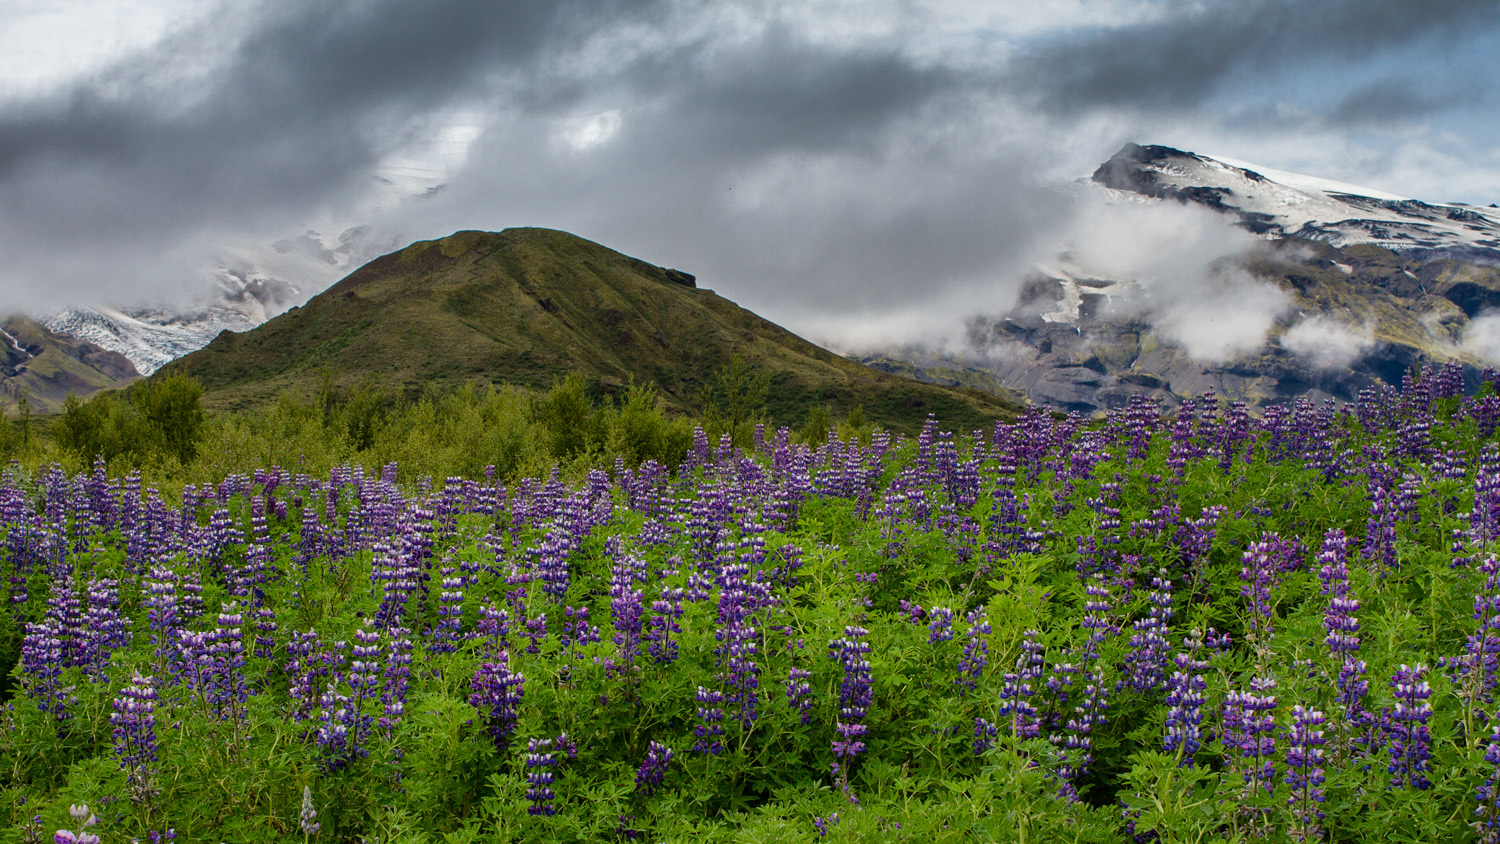 mountain landscape photography foreground flowers with mountains in the background